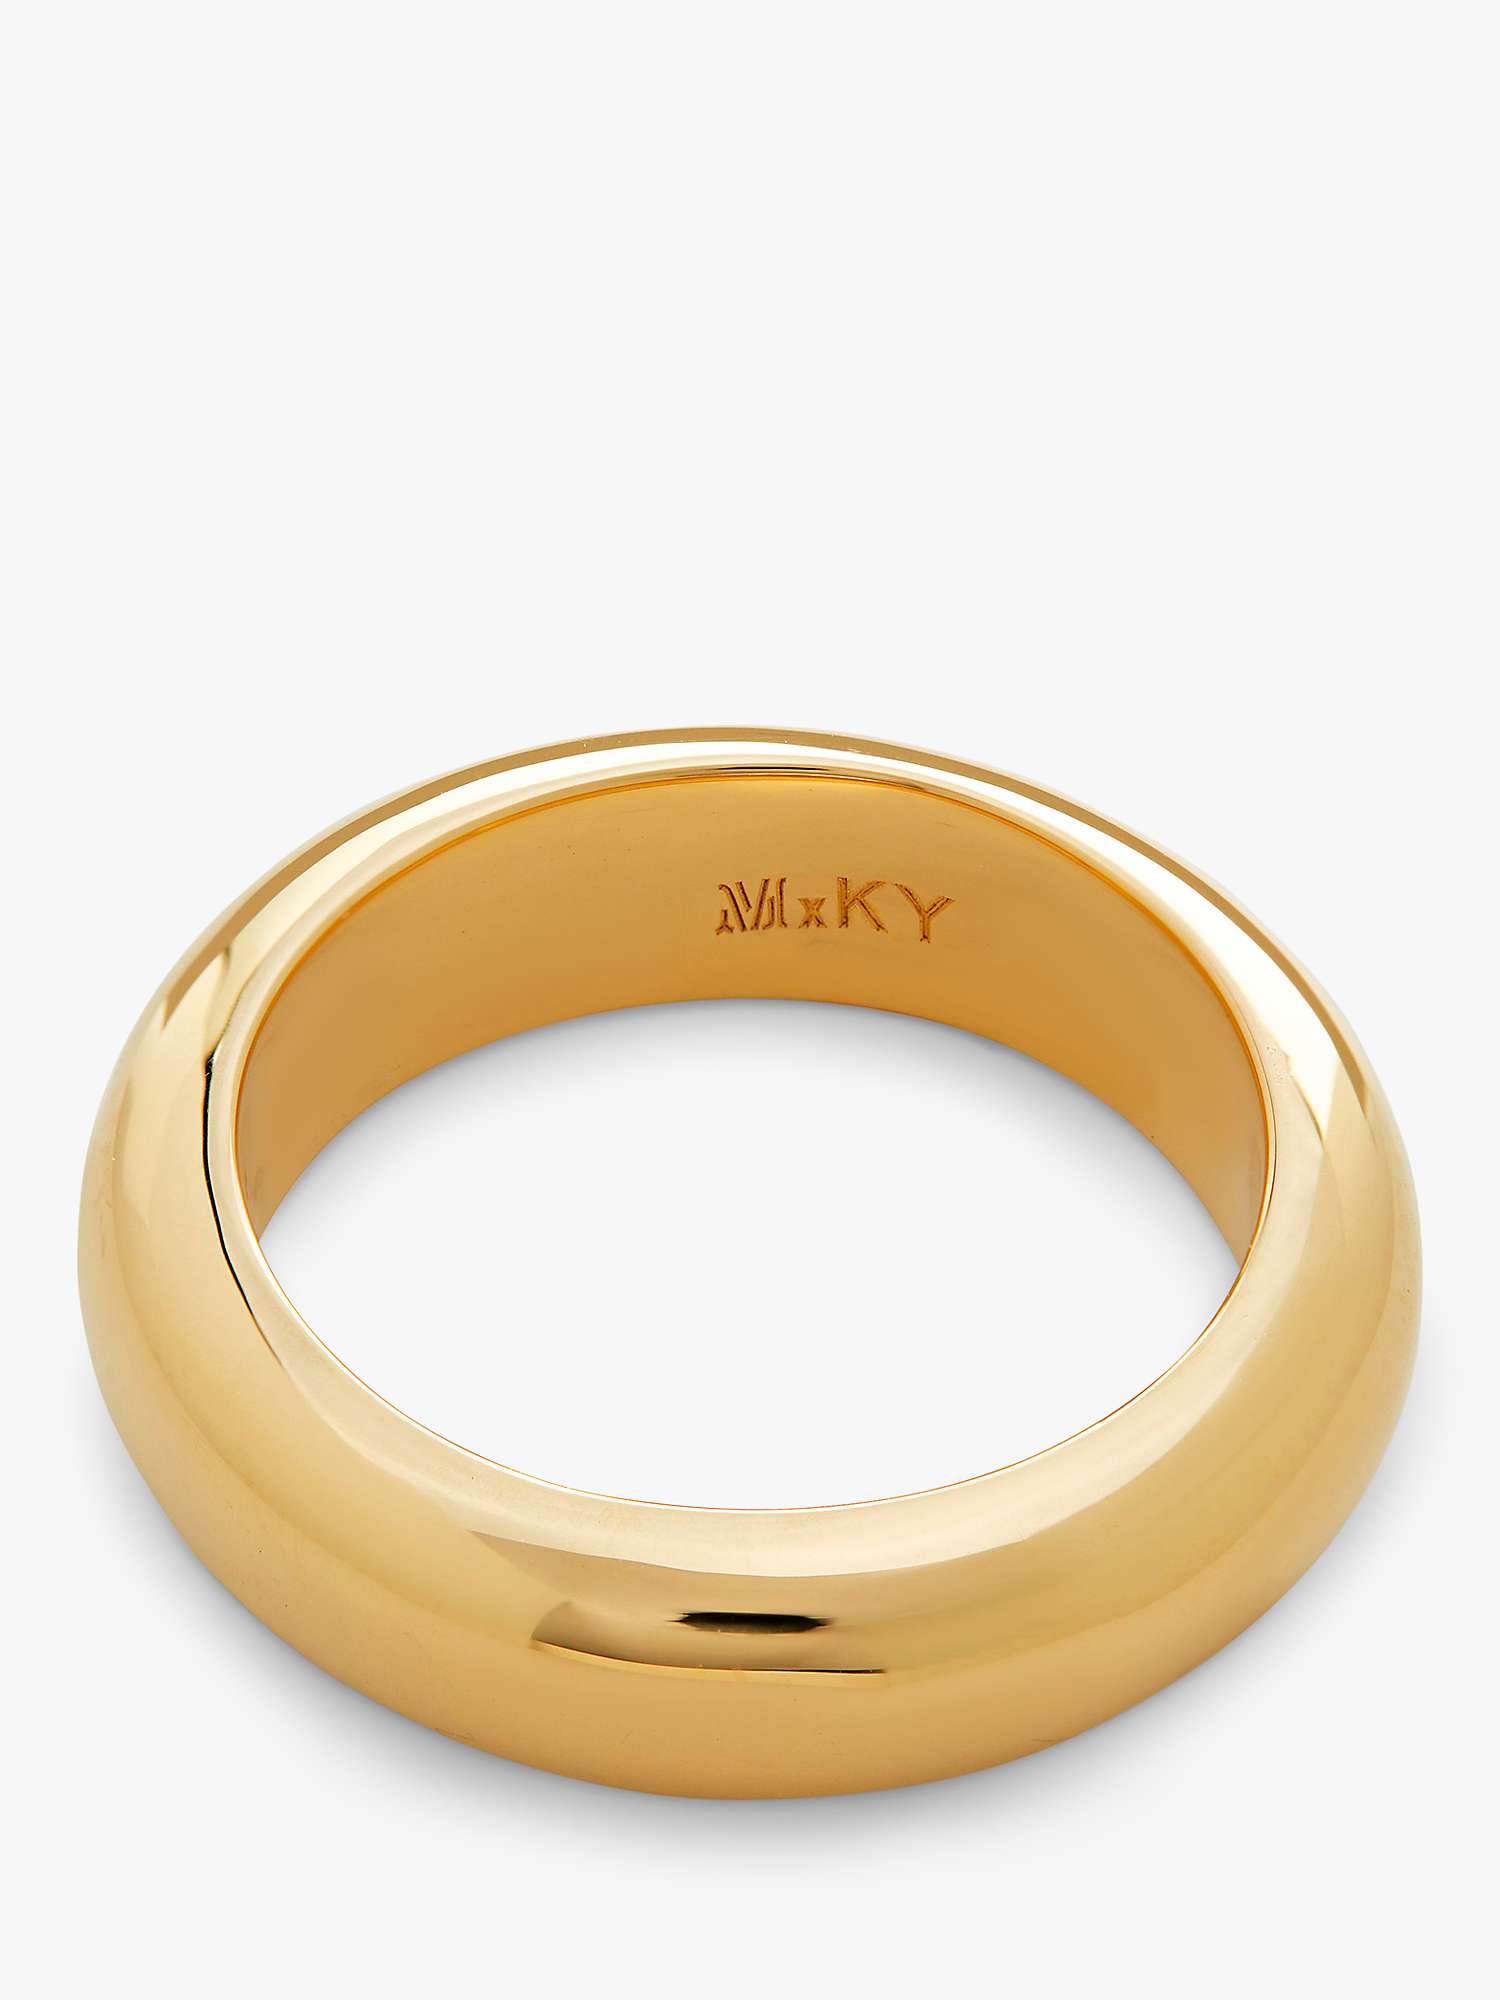 Buy Monica Vinader Kate Young Stacking Band Ring, Gold Online at johnlewis.com